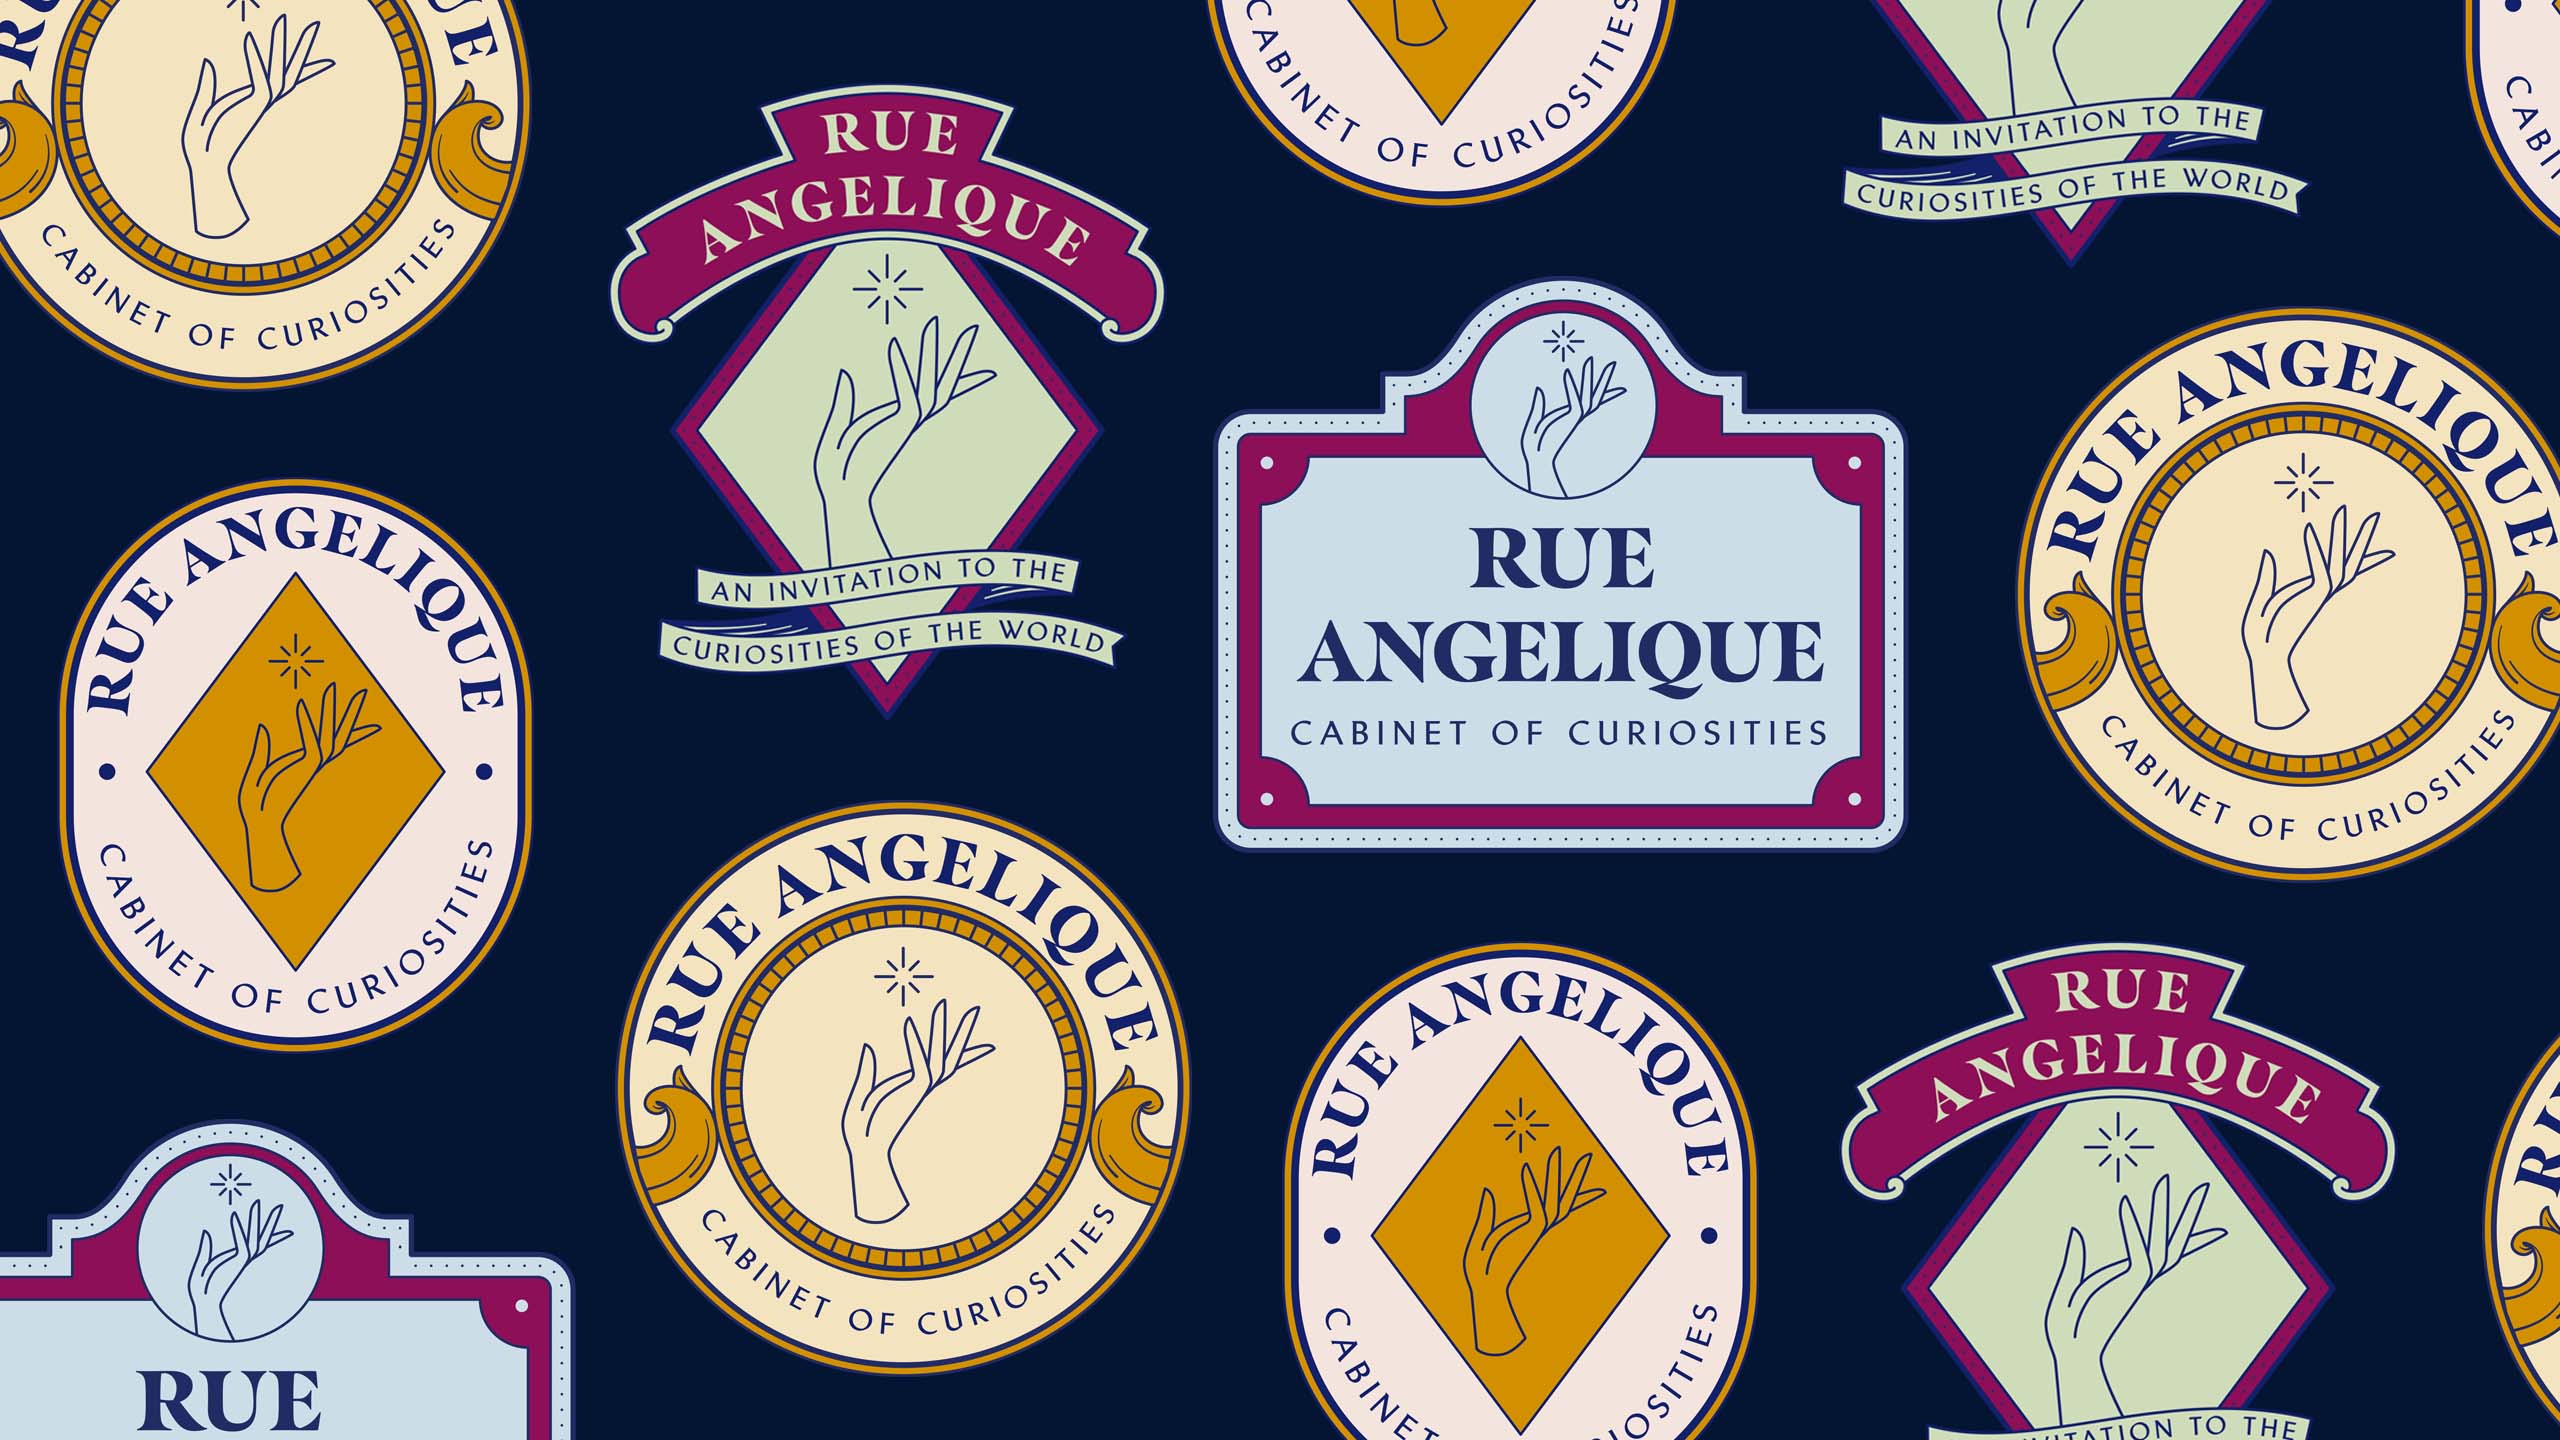 Icons and logos designed for antiques store Rue Angelique